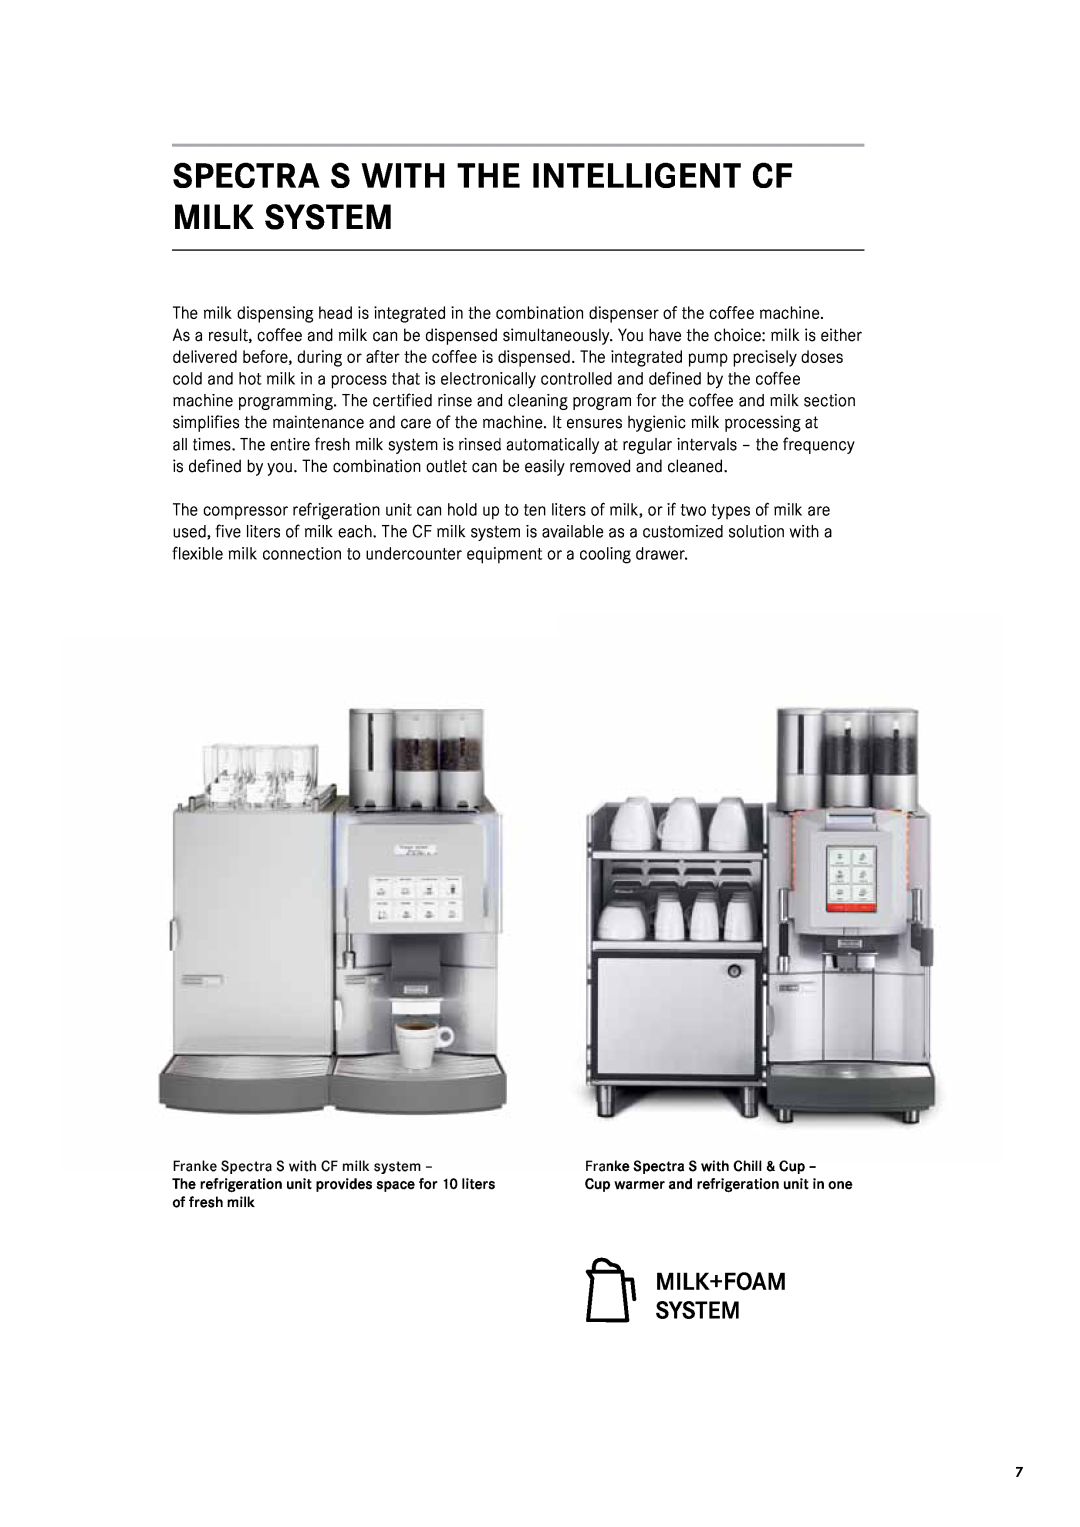 Franke Consumer Products 471086A1 manual Spectra S with the intelligent CF milk system 